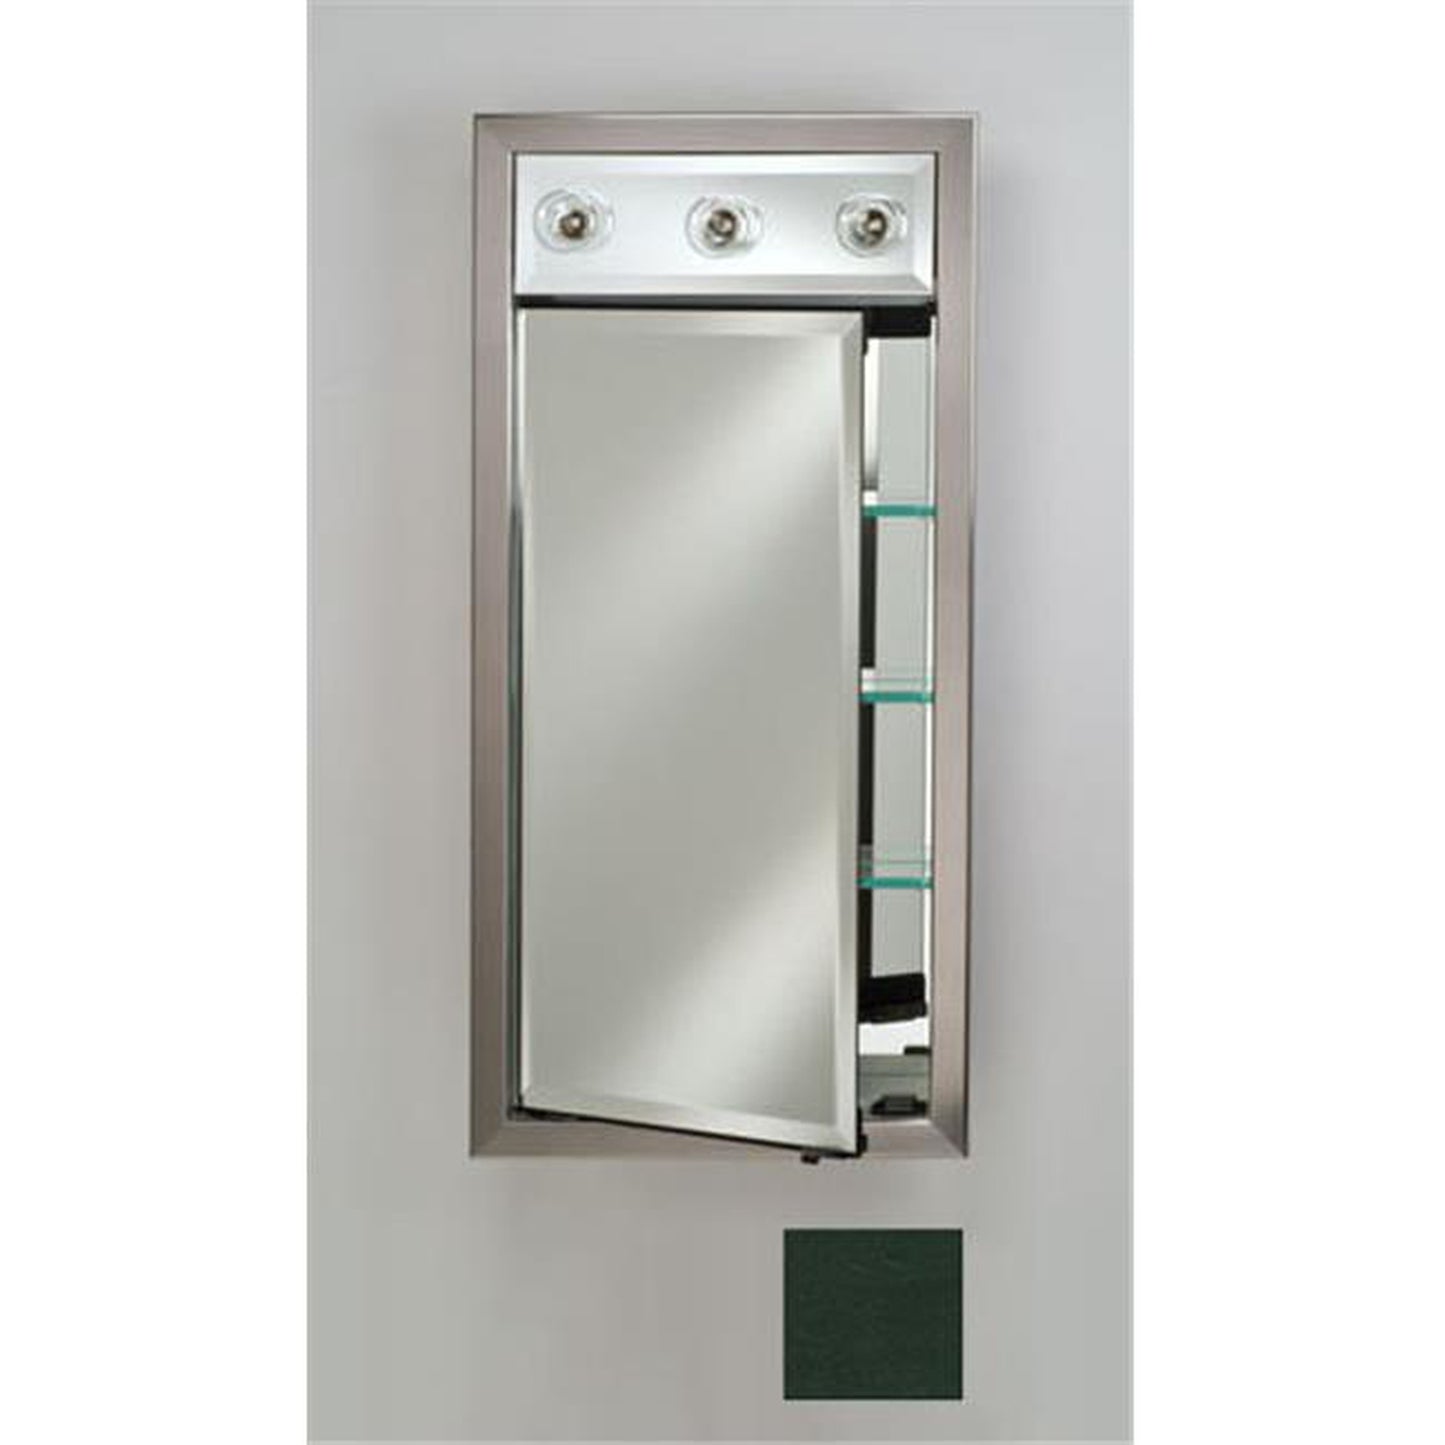 Afina Signature 17" x 34" Colorgrain Green Recessed Left Hinged Single Door Medicine Cabinet With Contemporary Lights